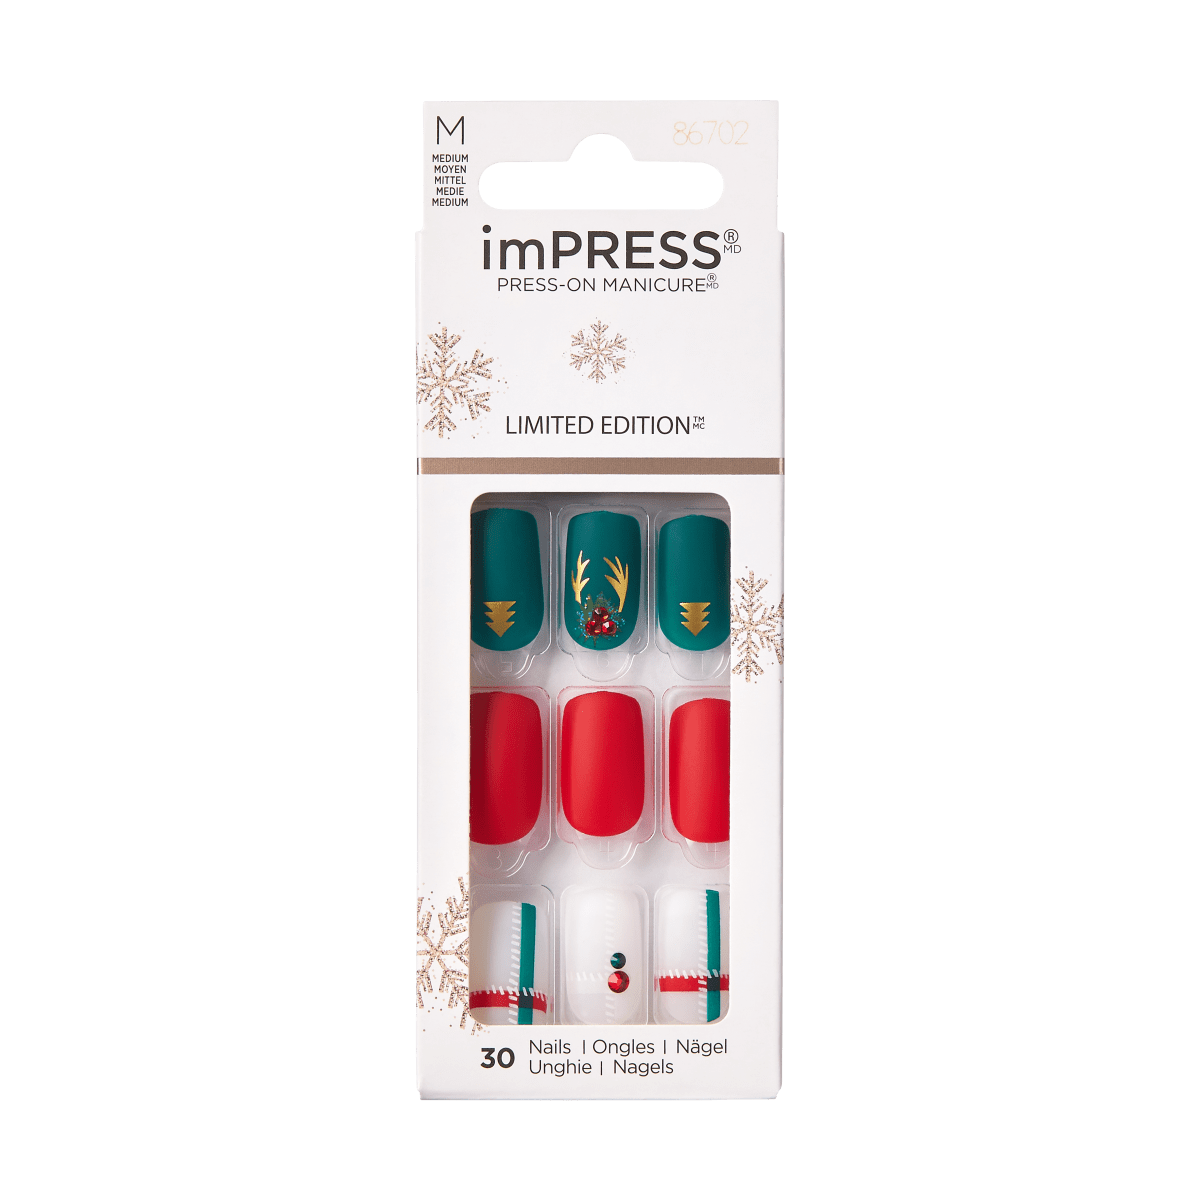 imPRESS Press-On Manicure Limited Edition Holiday - Gift 4 You